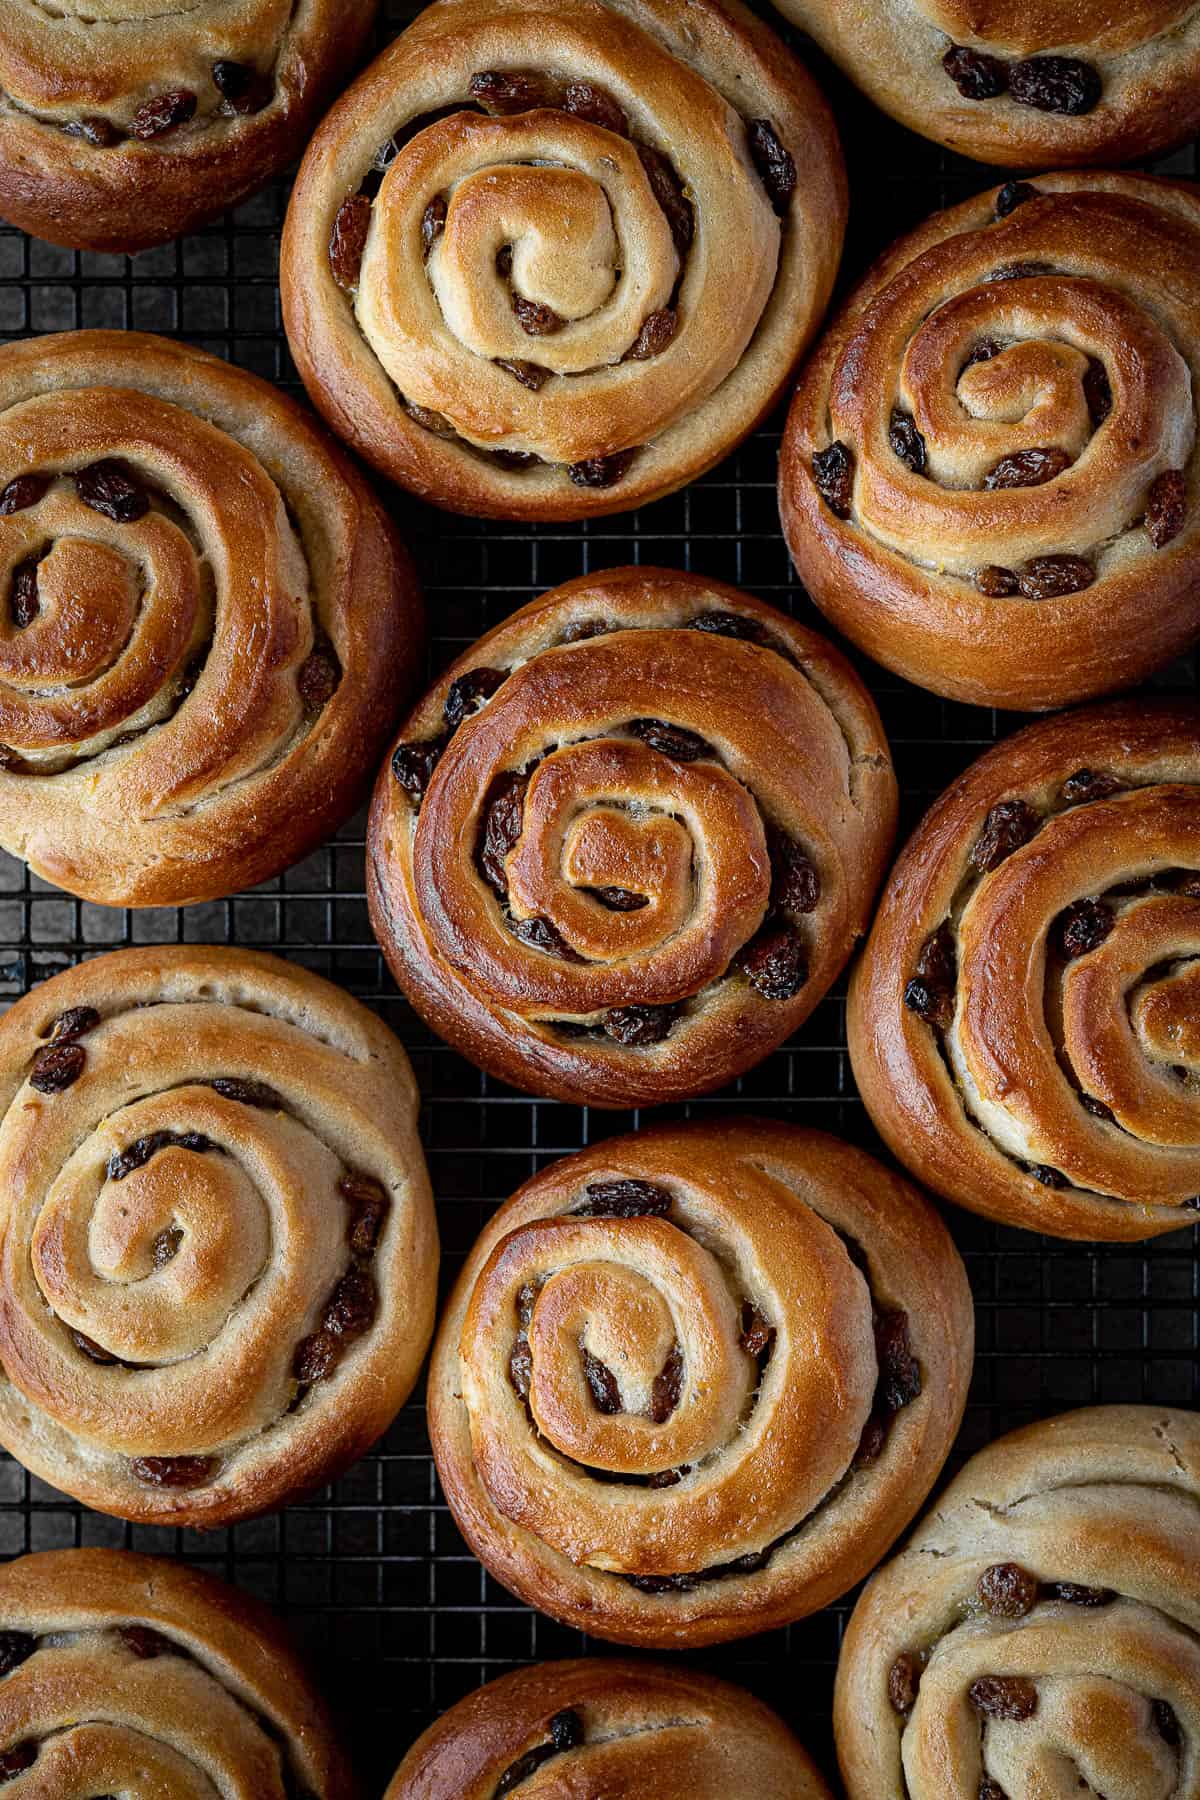 Un-iced Belgian buns on a wire rack.